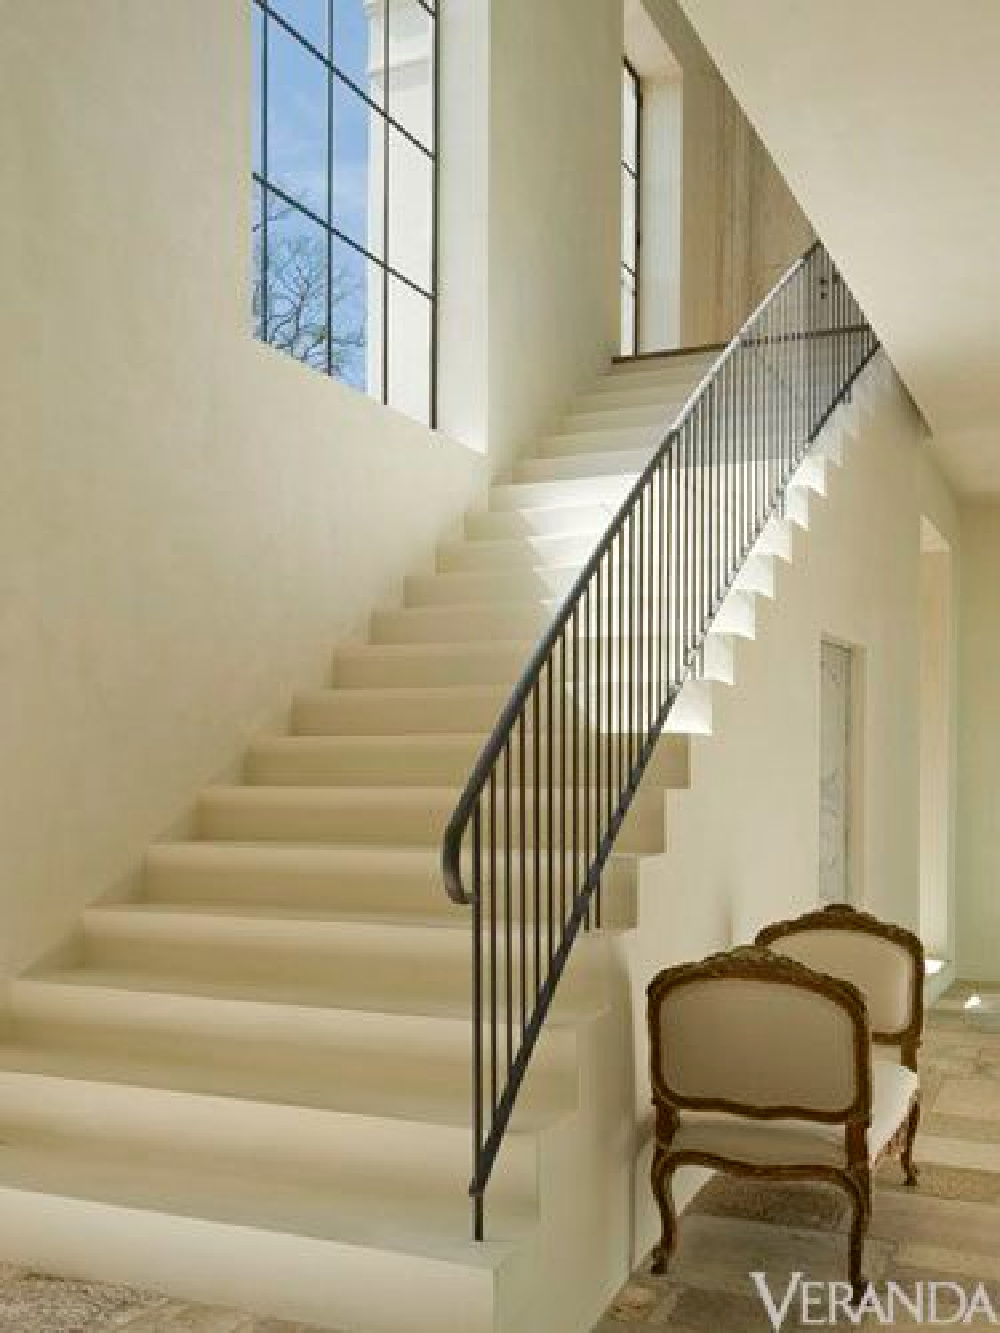 The combination of a simple iron railing with an elegant plaster stair doesn't get any better. It's architecturally beautiful and really makes a statement. Plus, it can work in both traditional and contemporary settings.